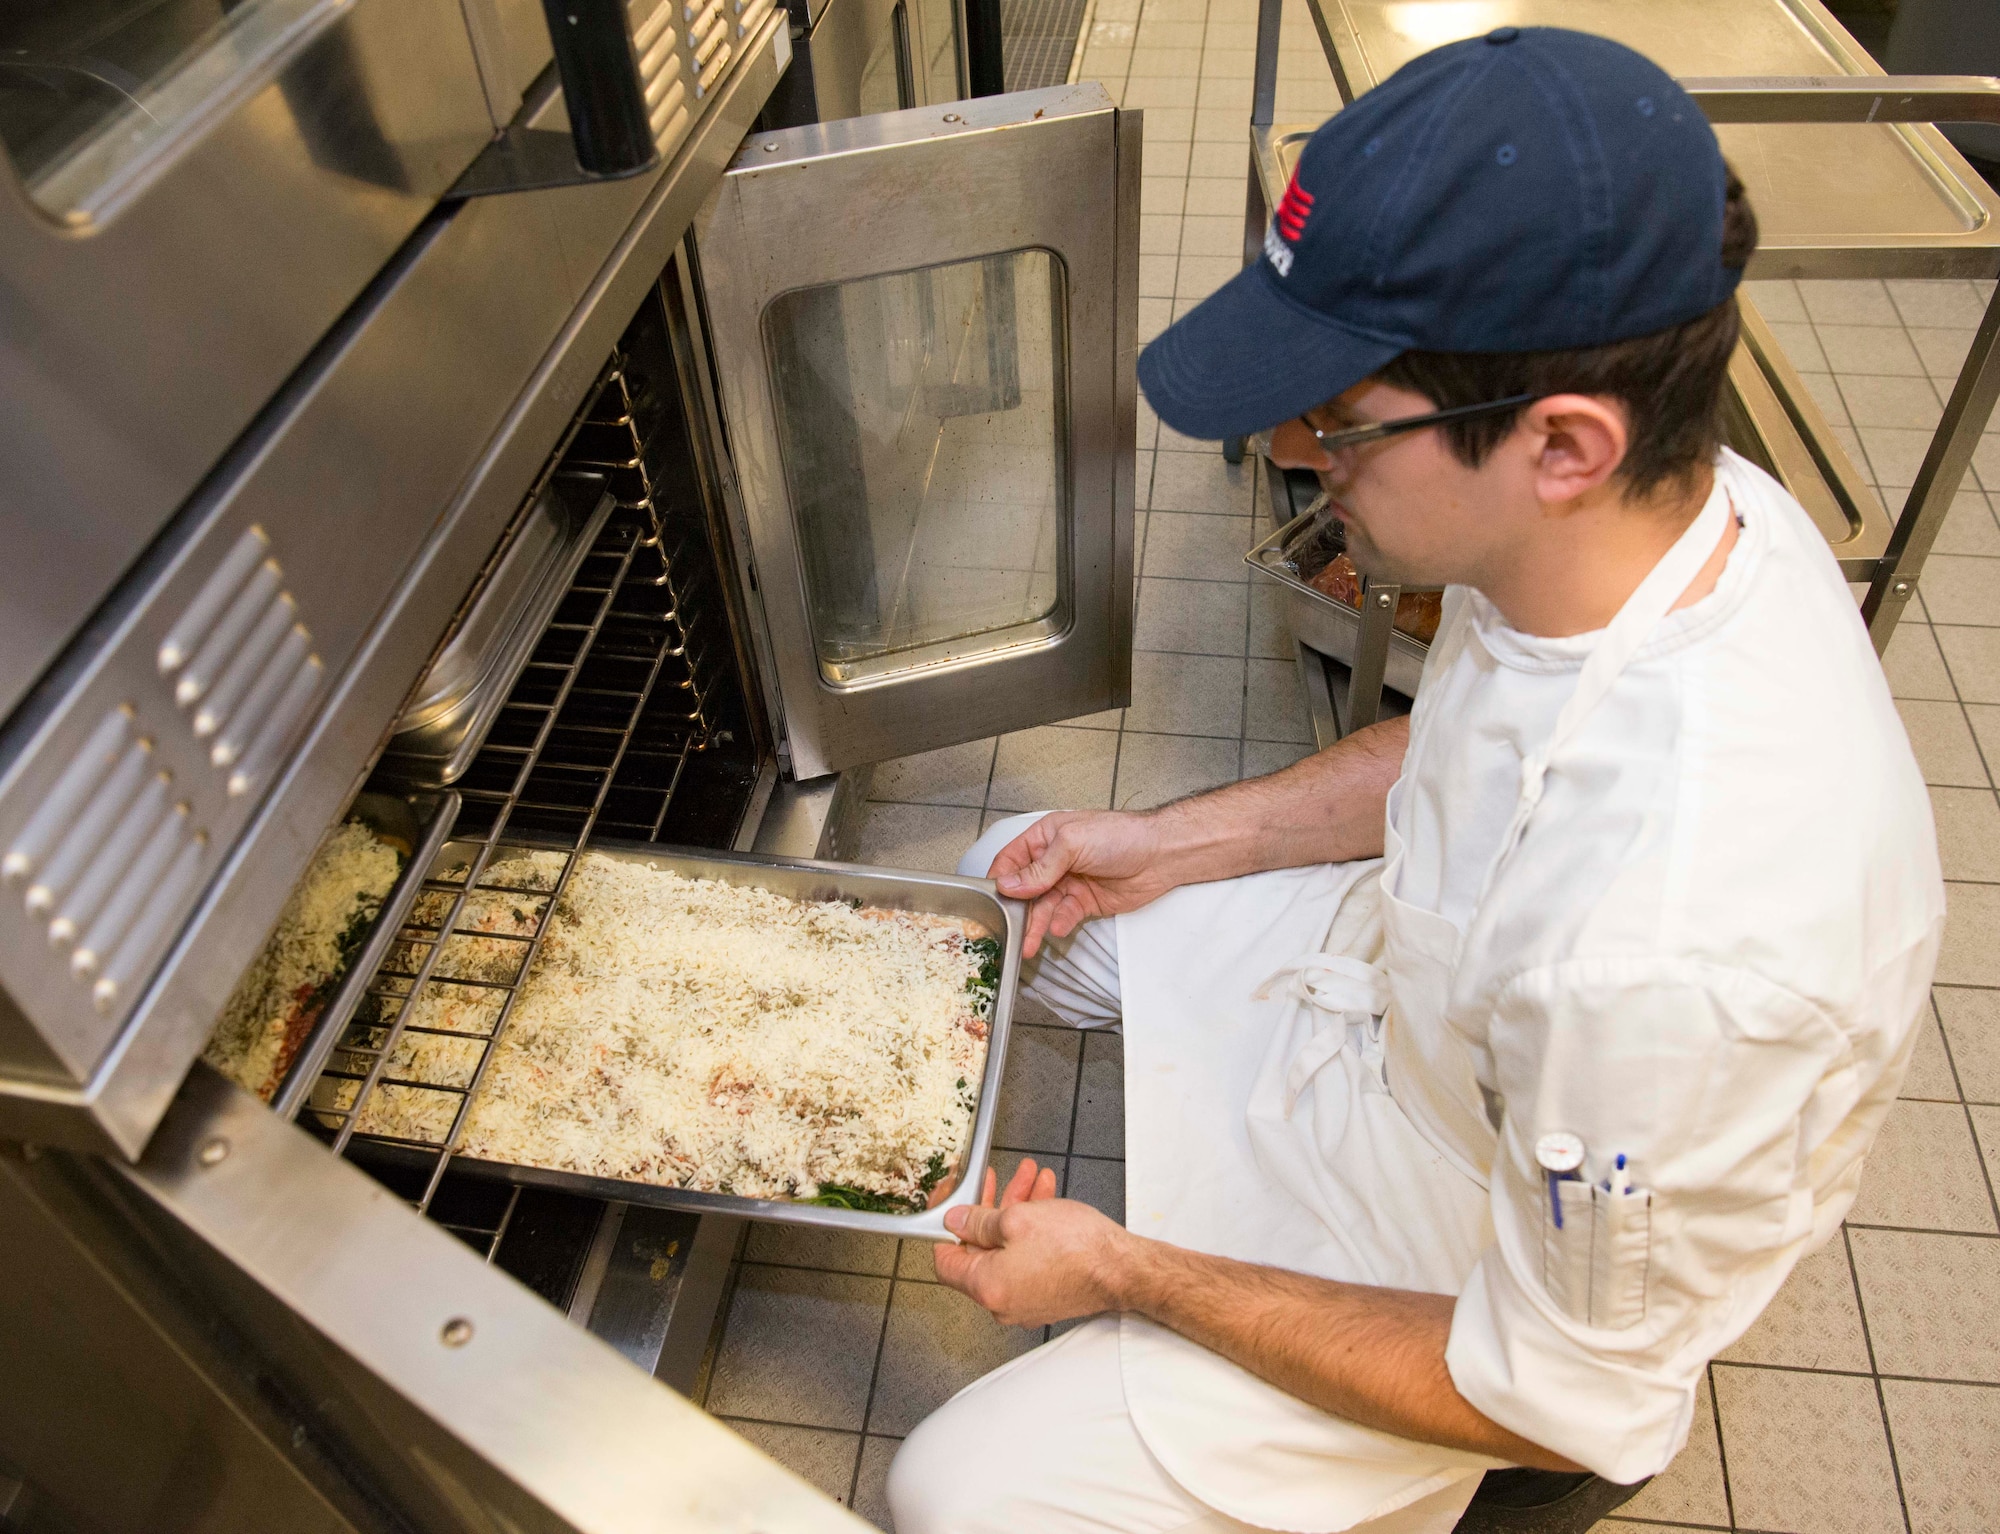 Carsten Mueller, 786th Force Support Squadron Rheinland Inn lead cook, puts lasagna in the oven on Ramstein Air Base, Germany, Nov. 3, 2017. The Rheinland Inn mission is to provide nutritious, flavorful and quality meals for dormitory residents. (U.S. Air Force photo by Senior Airman Elizabeth Baker)